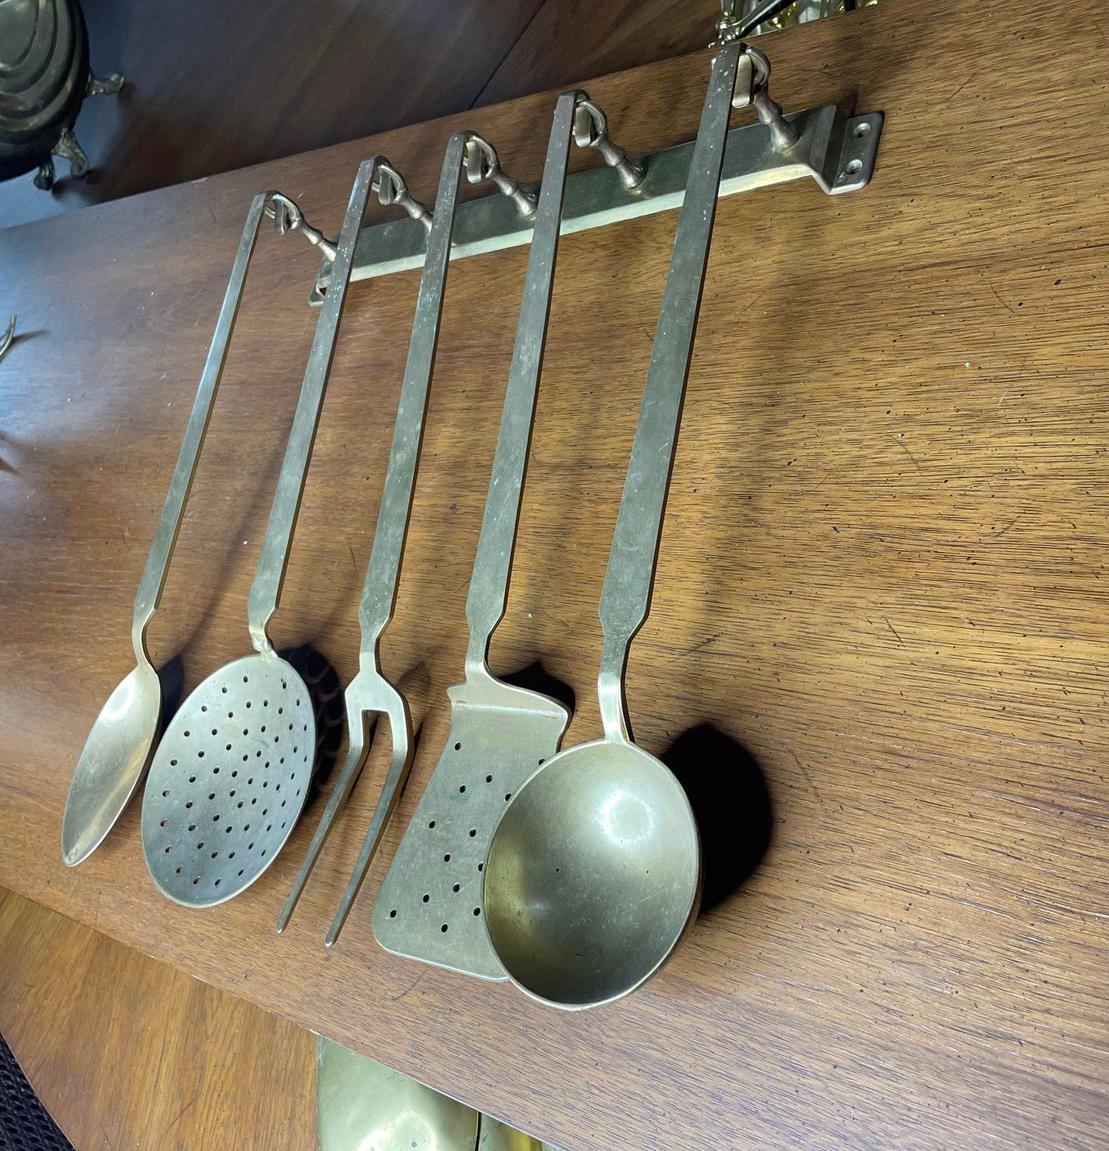 A set of solid brass serving utensils perfect to decorate your kitchen walls with taste! (Pun intended.) Included are five large solid brass serving utensils and the original hanging bar, so six pieces total. You might have come across a similar set